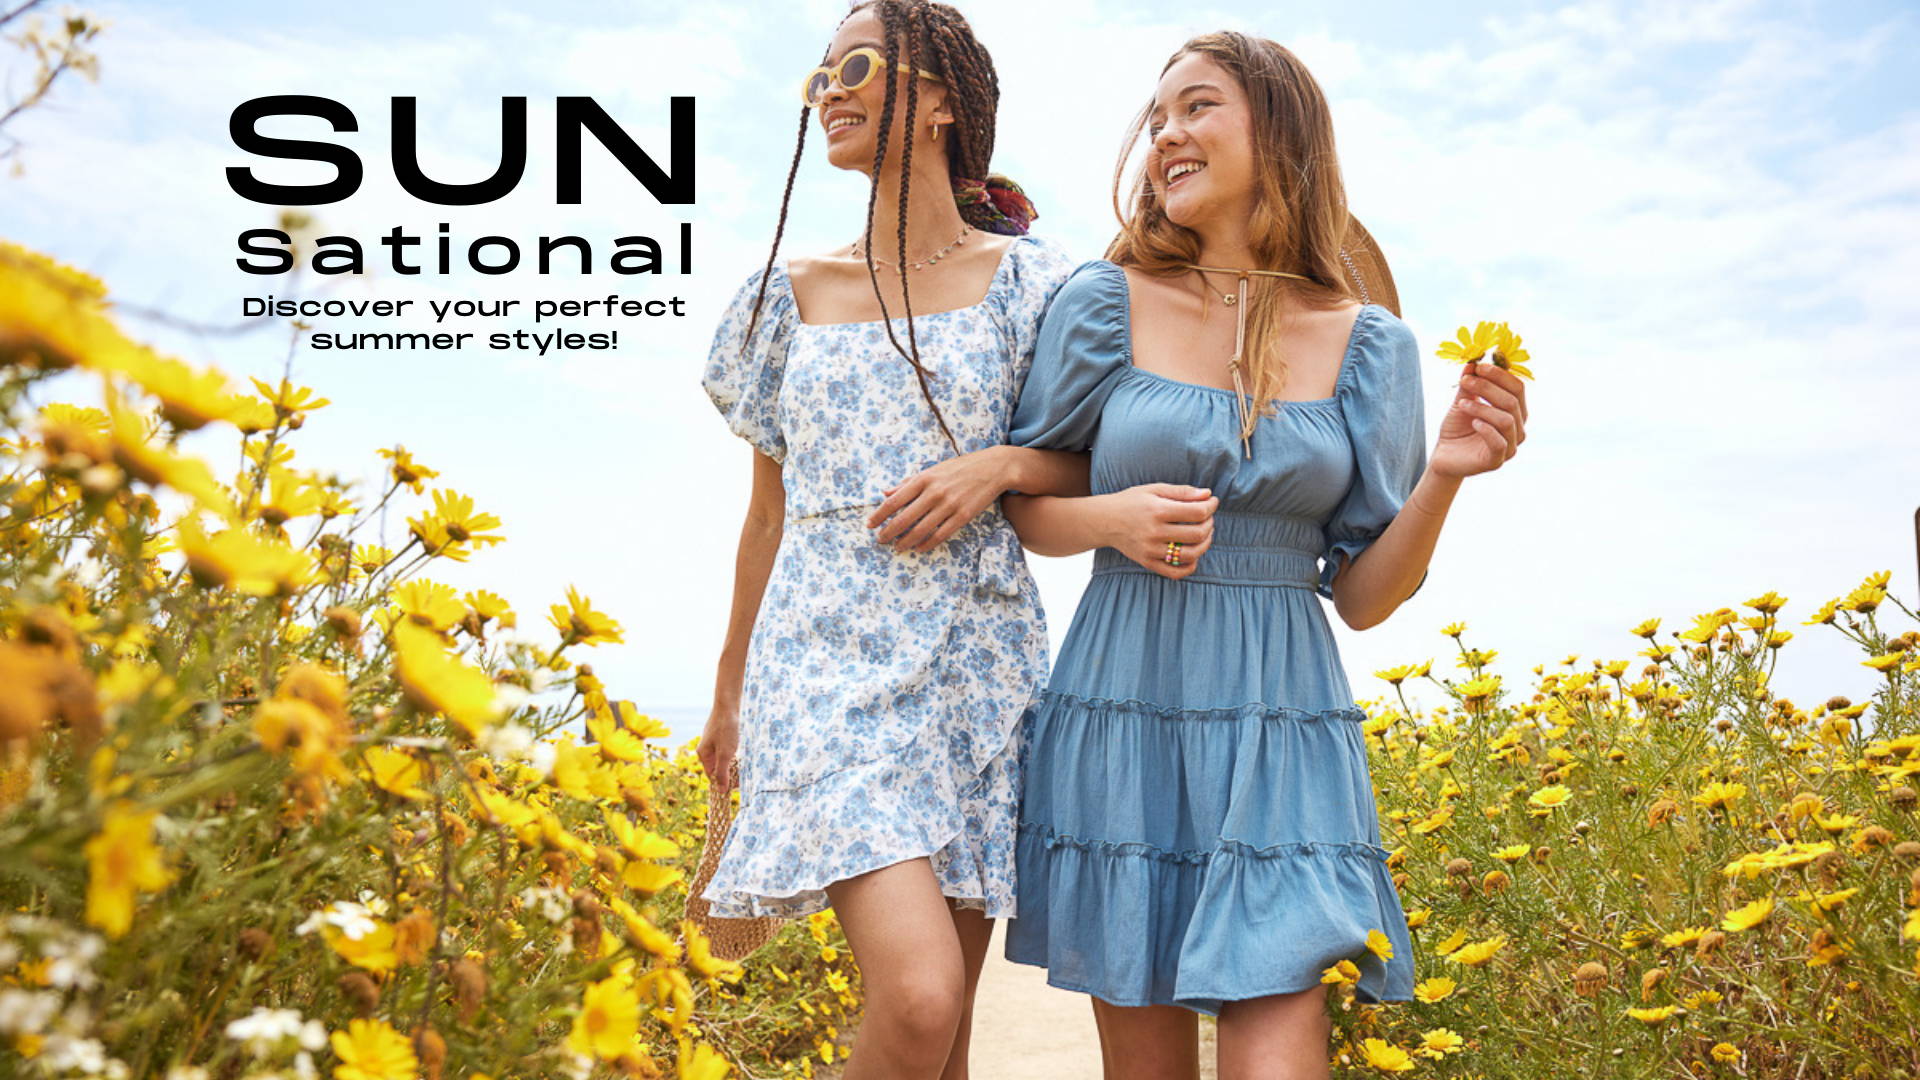 trixxi SUN-sational summer campaign with two girls walking in yellow flower field in a blue tier dress and a blue floral wrap ruffle dress.